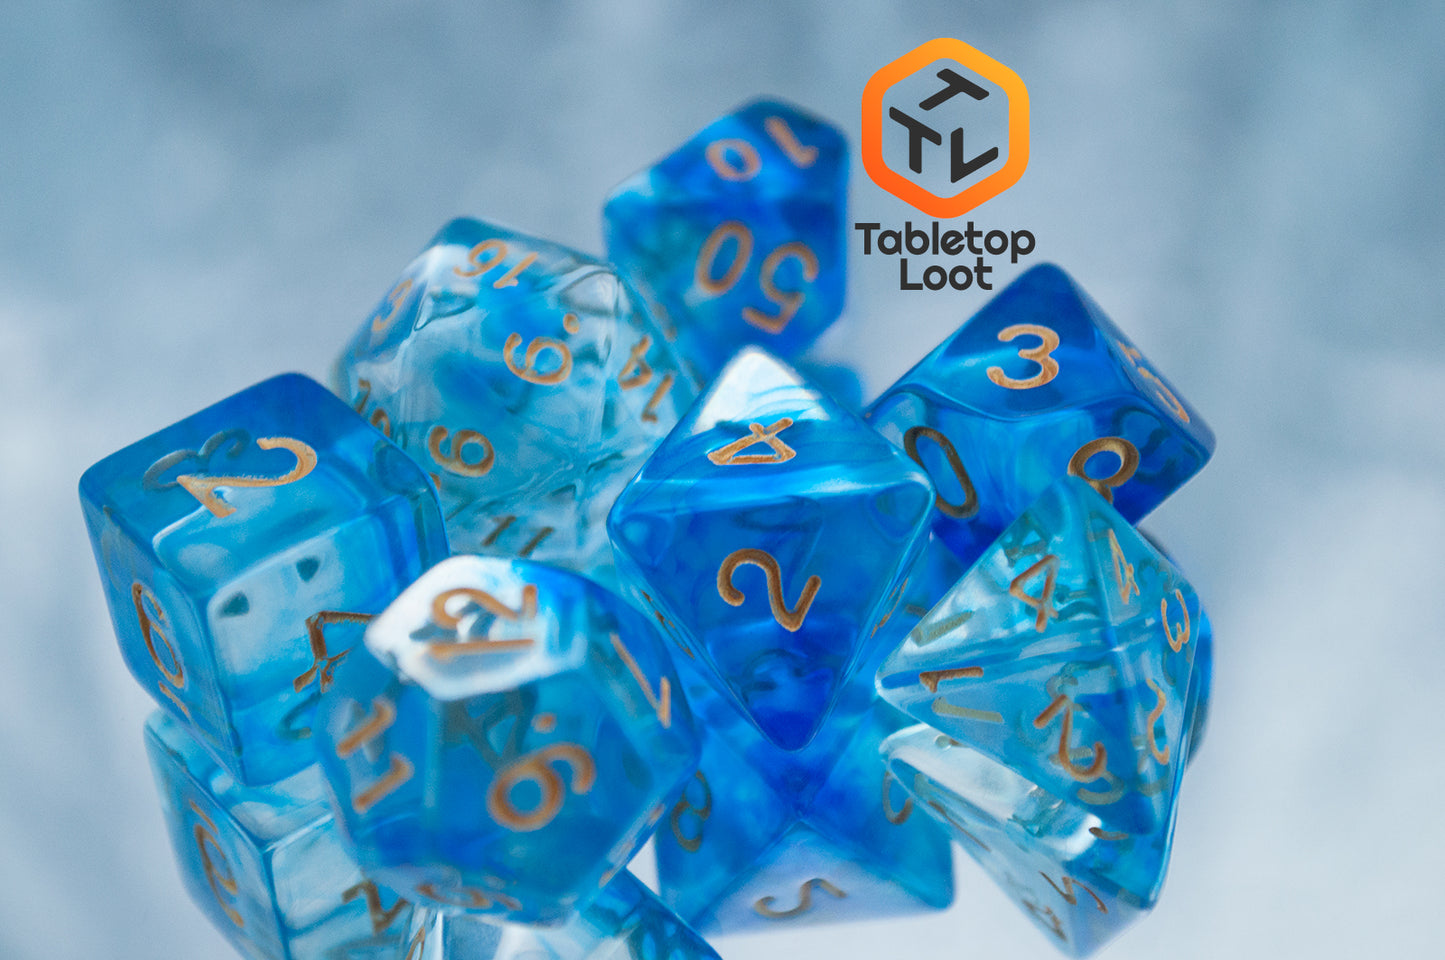 The Under the Sea 7 piece dice set from Tabletop Loot with swirls of blue and gold numbering.